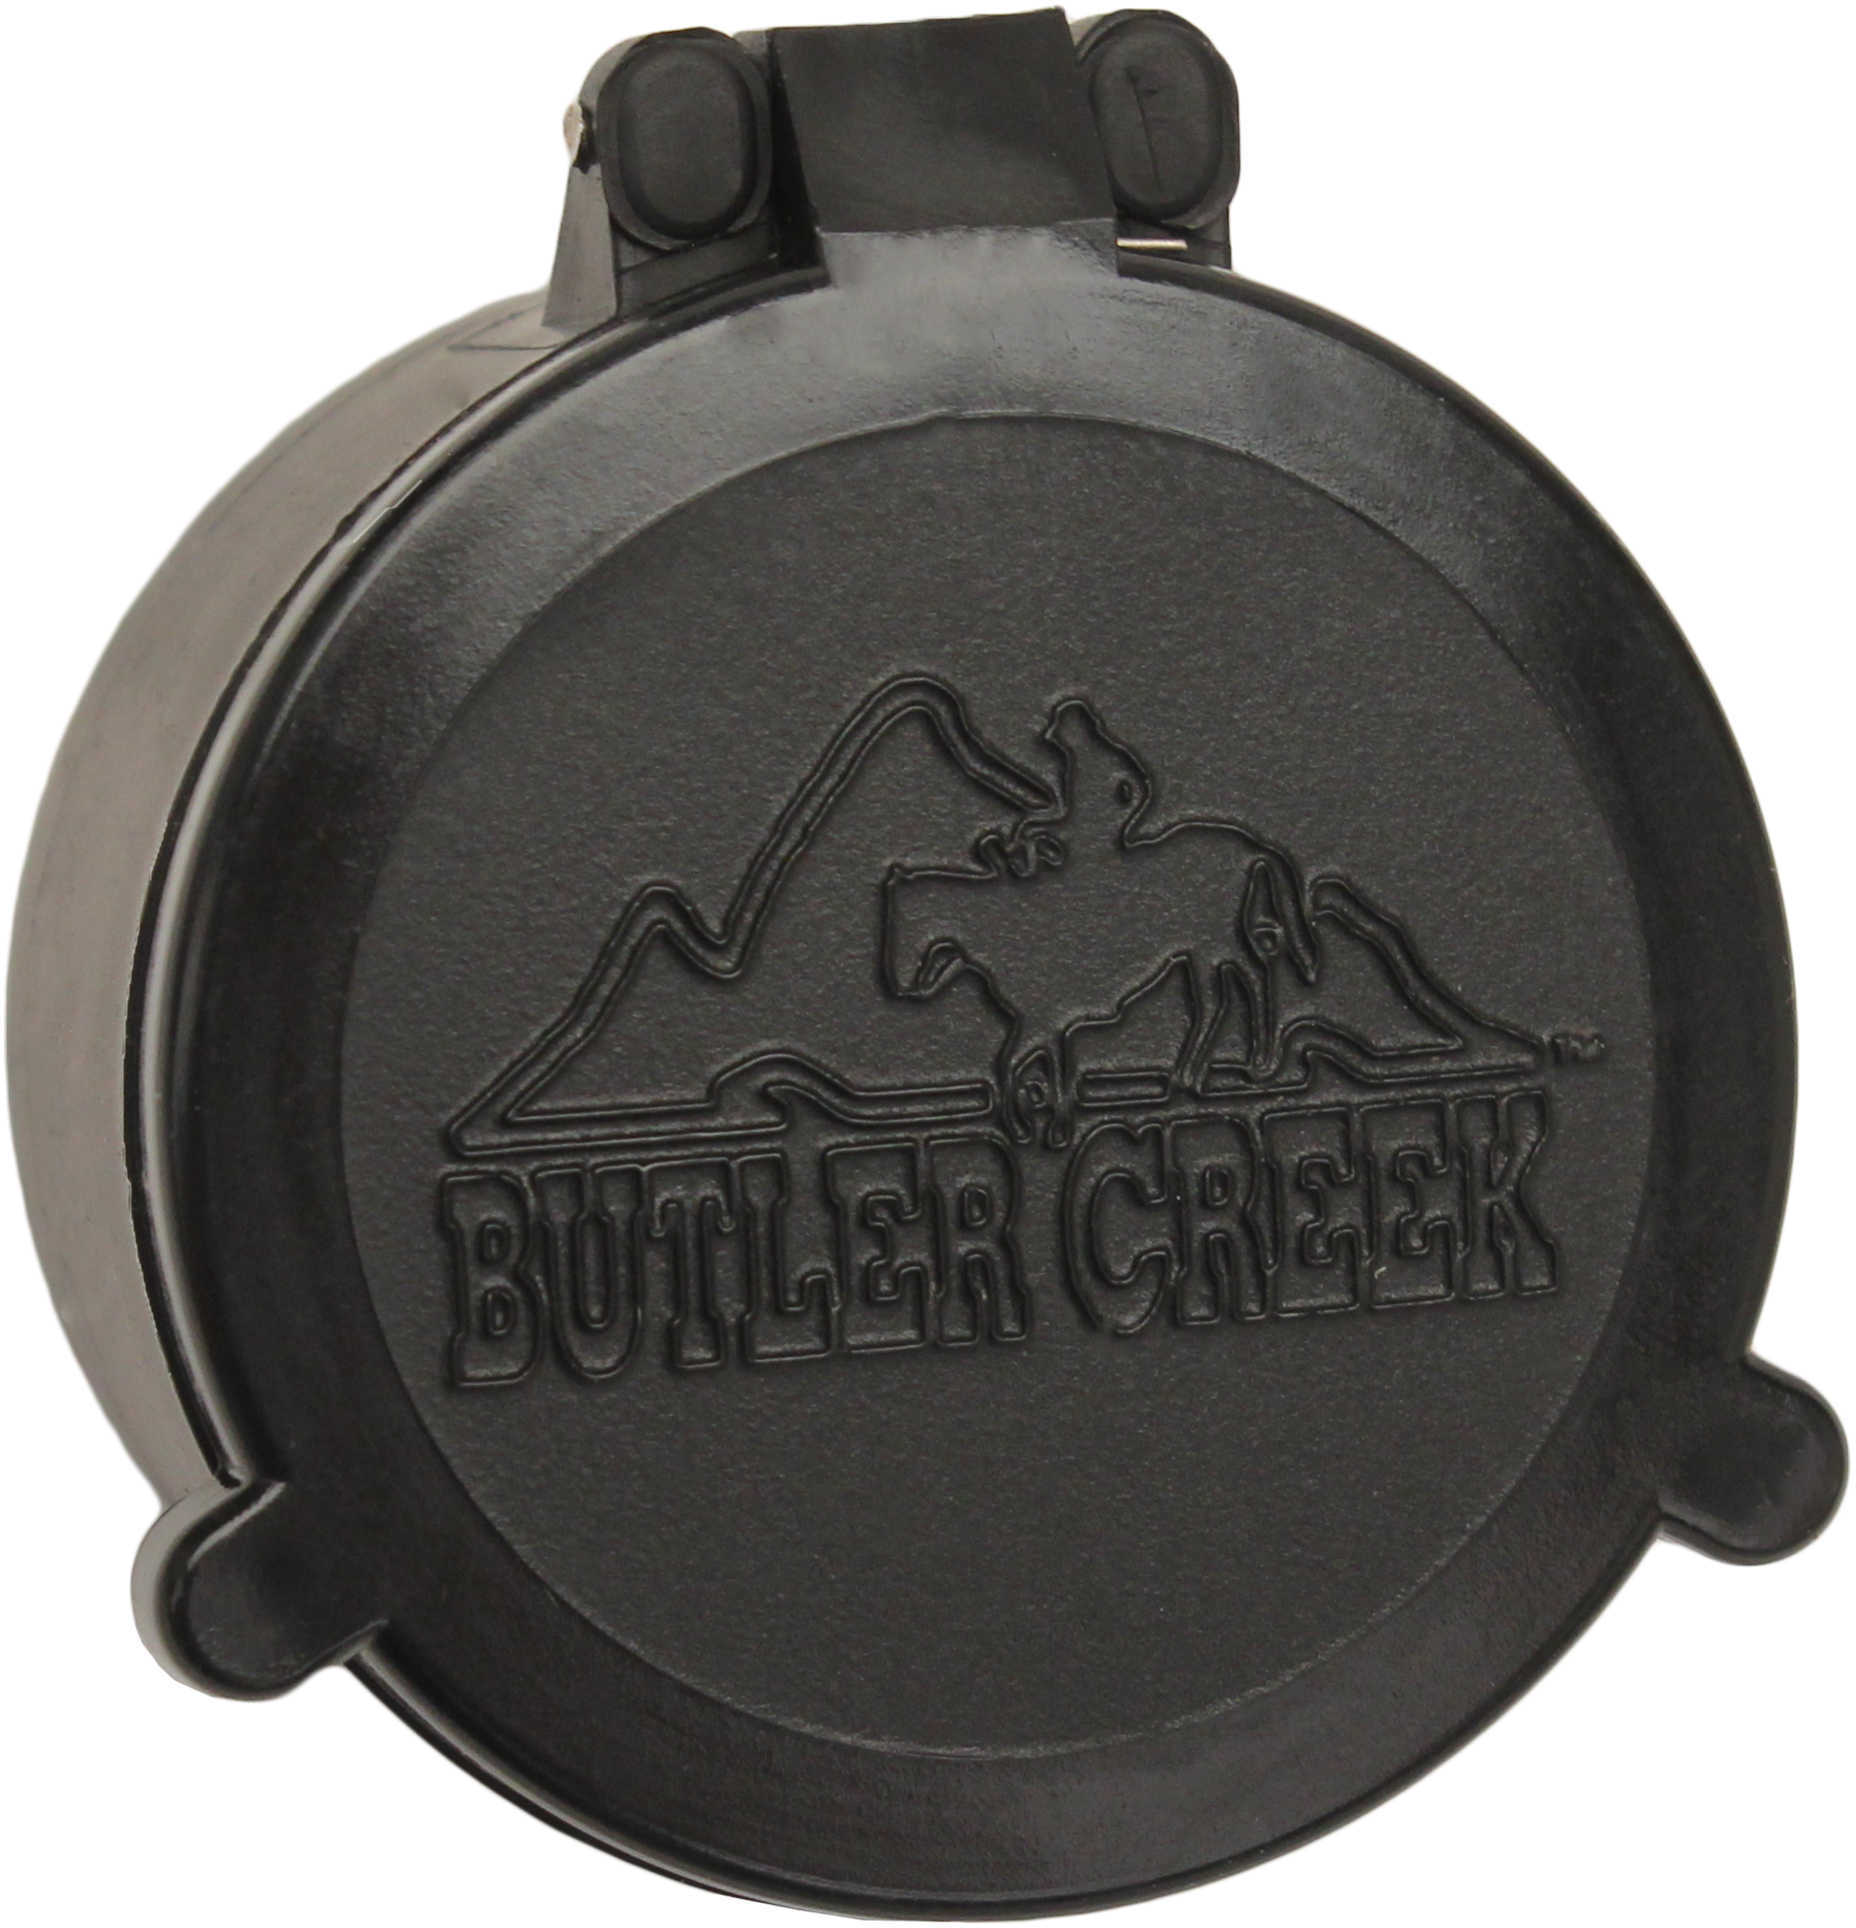 Butler Creek Flip-Open Scope Cover - 28 Objective 1.890" Diameter Quiet Opening lids at The Touch Of Your thum